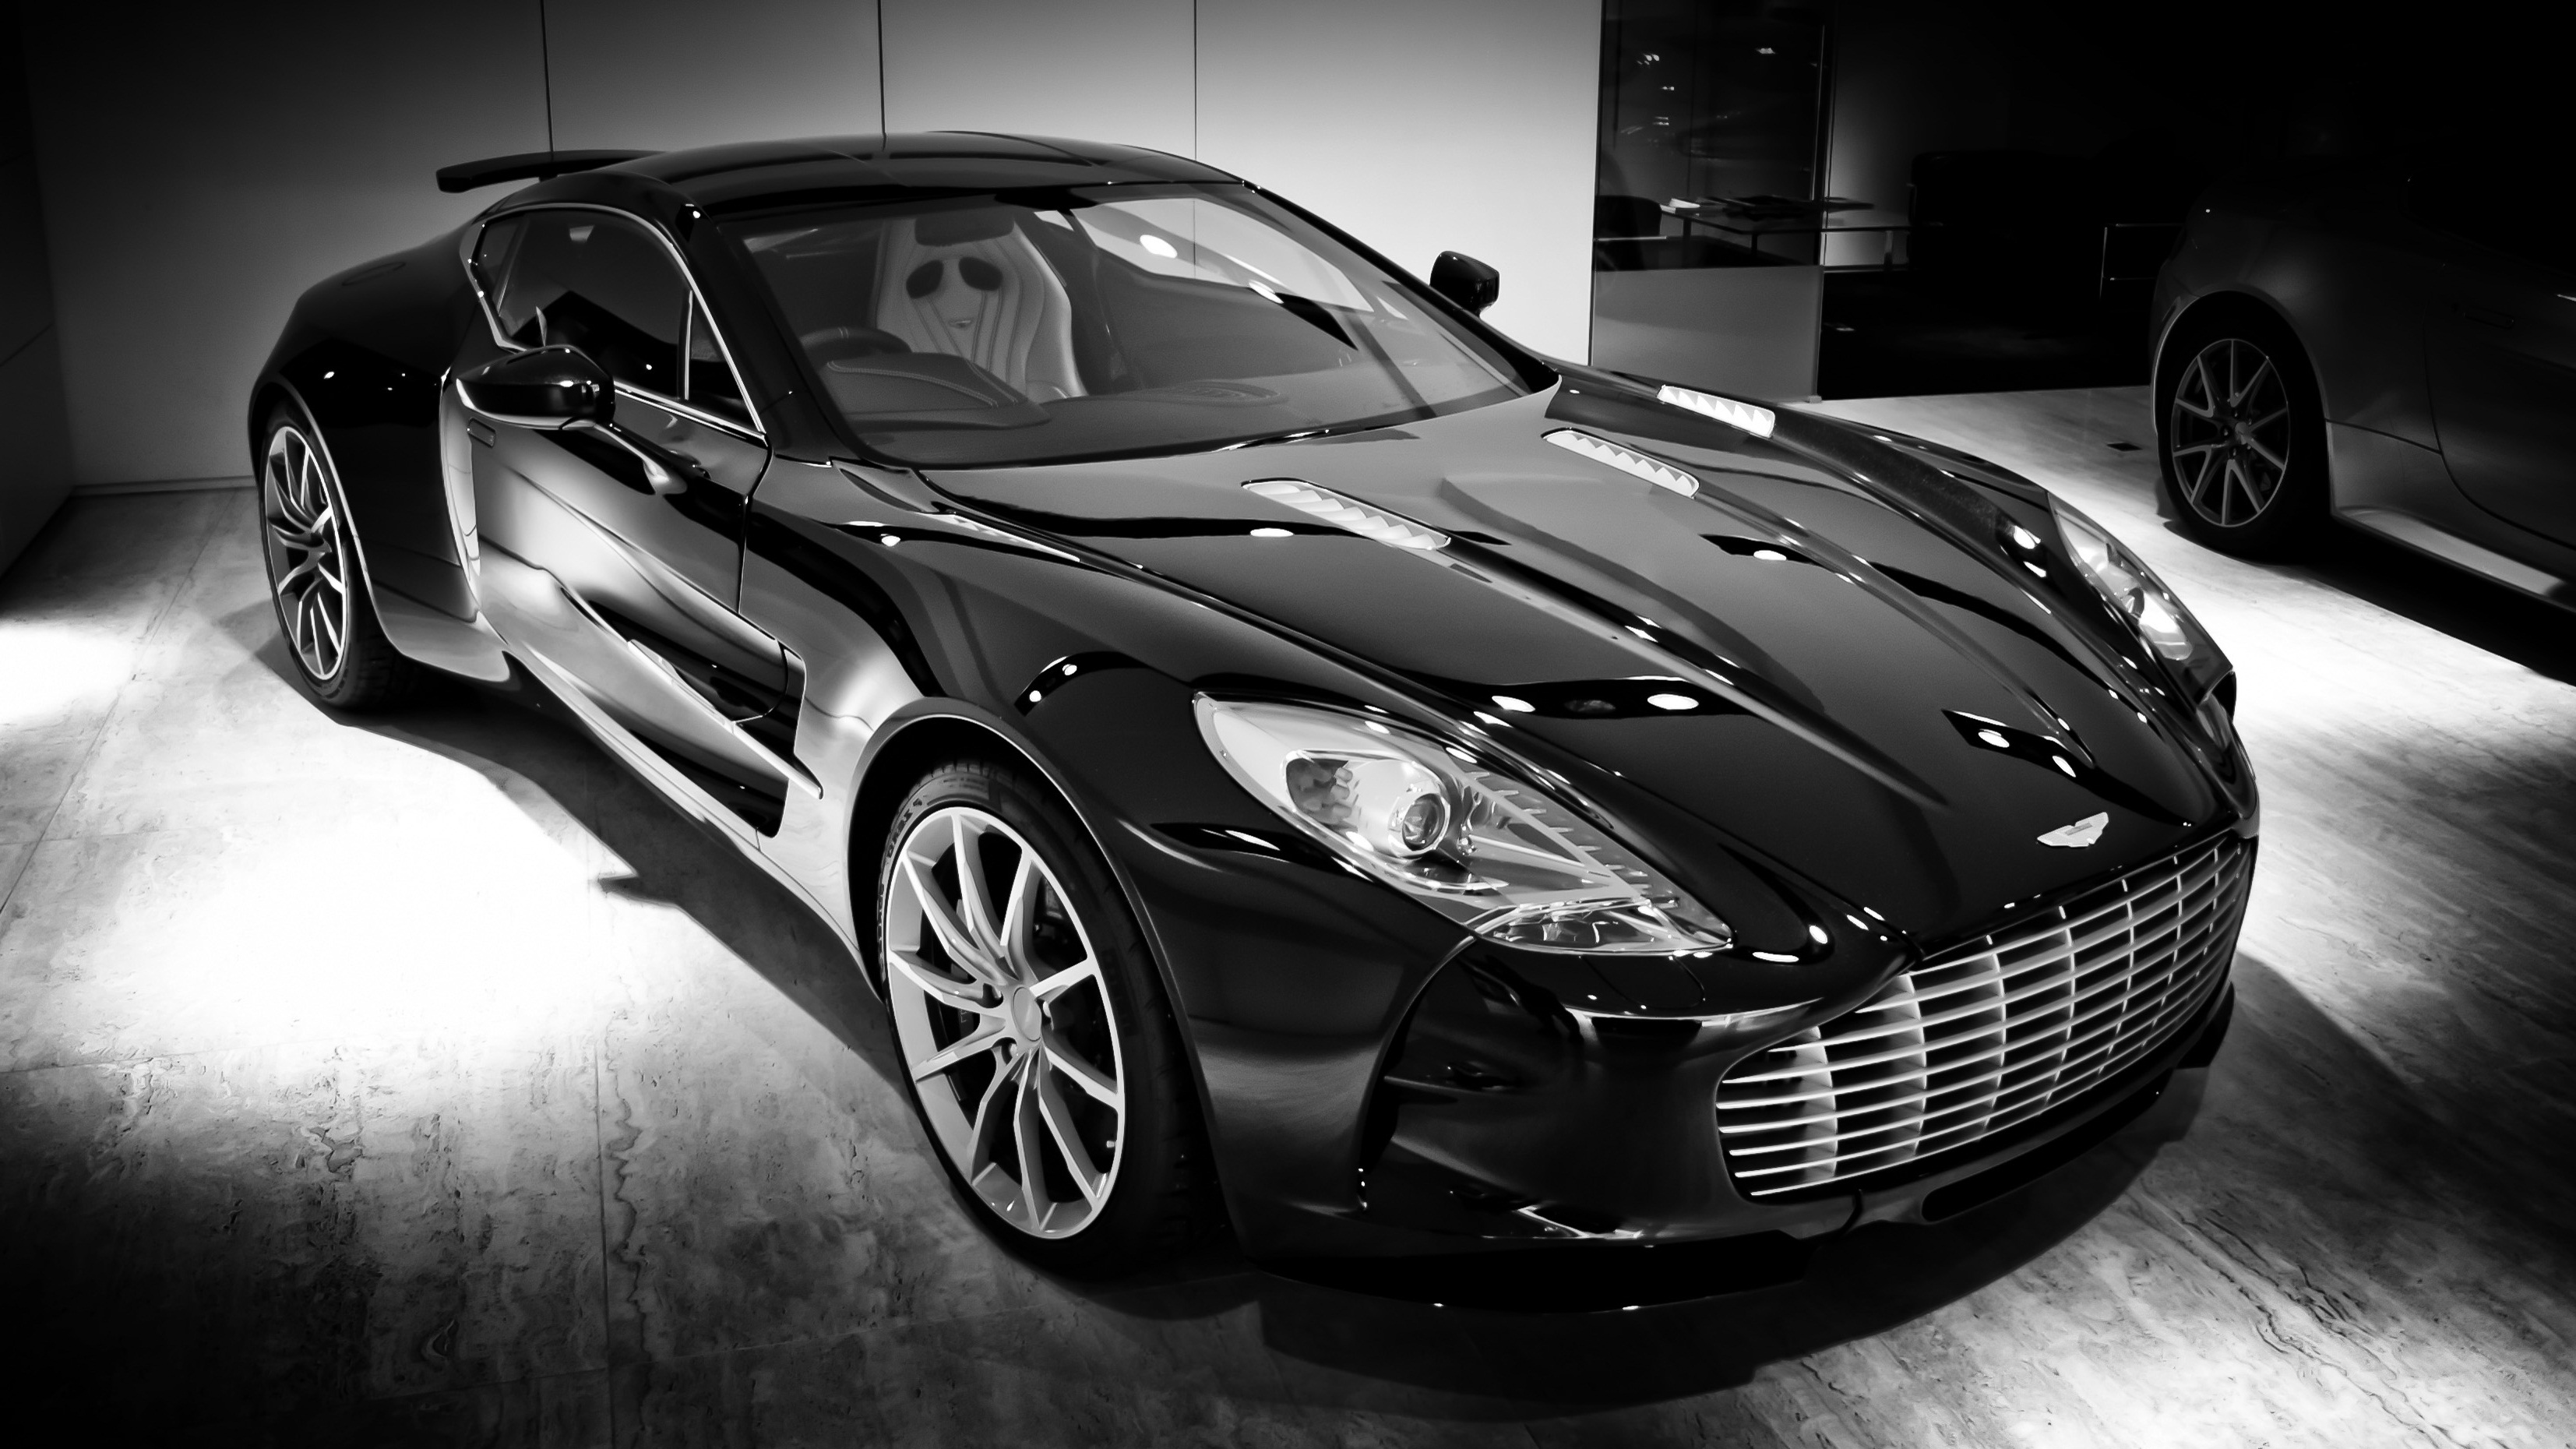 About Vehicles Love To Have A Aston Martin One Black Wallpaper